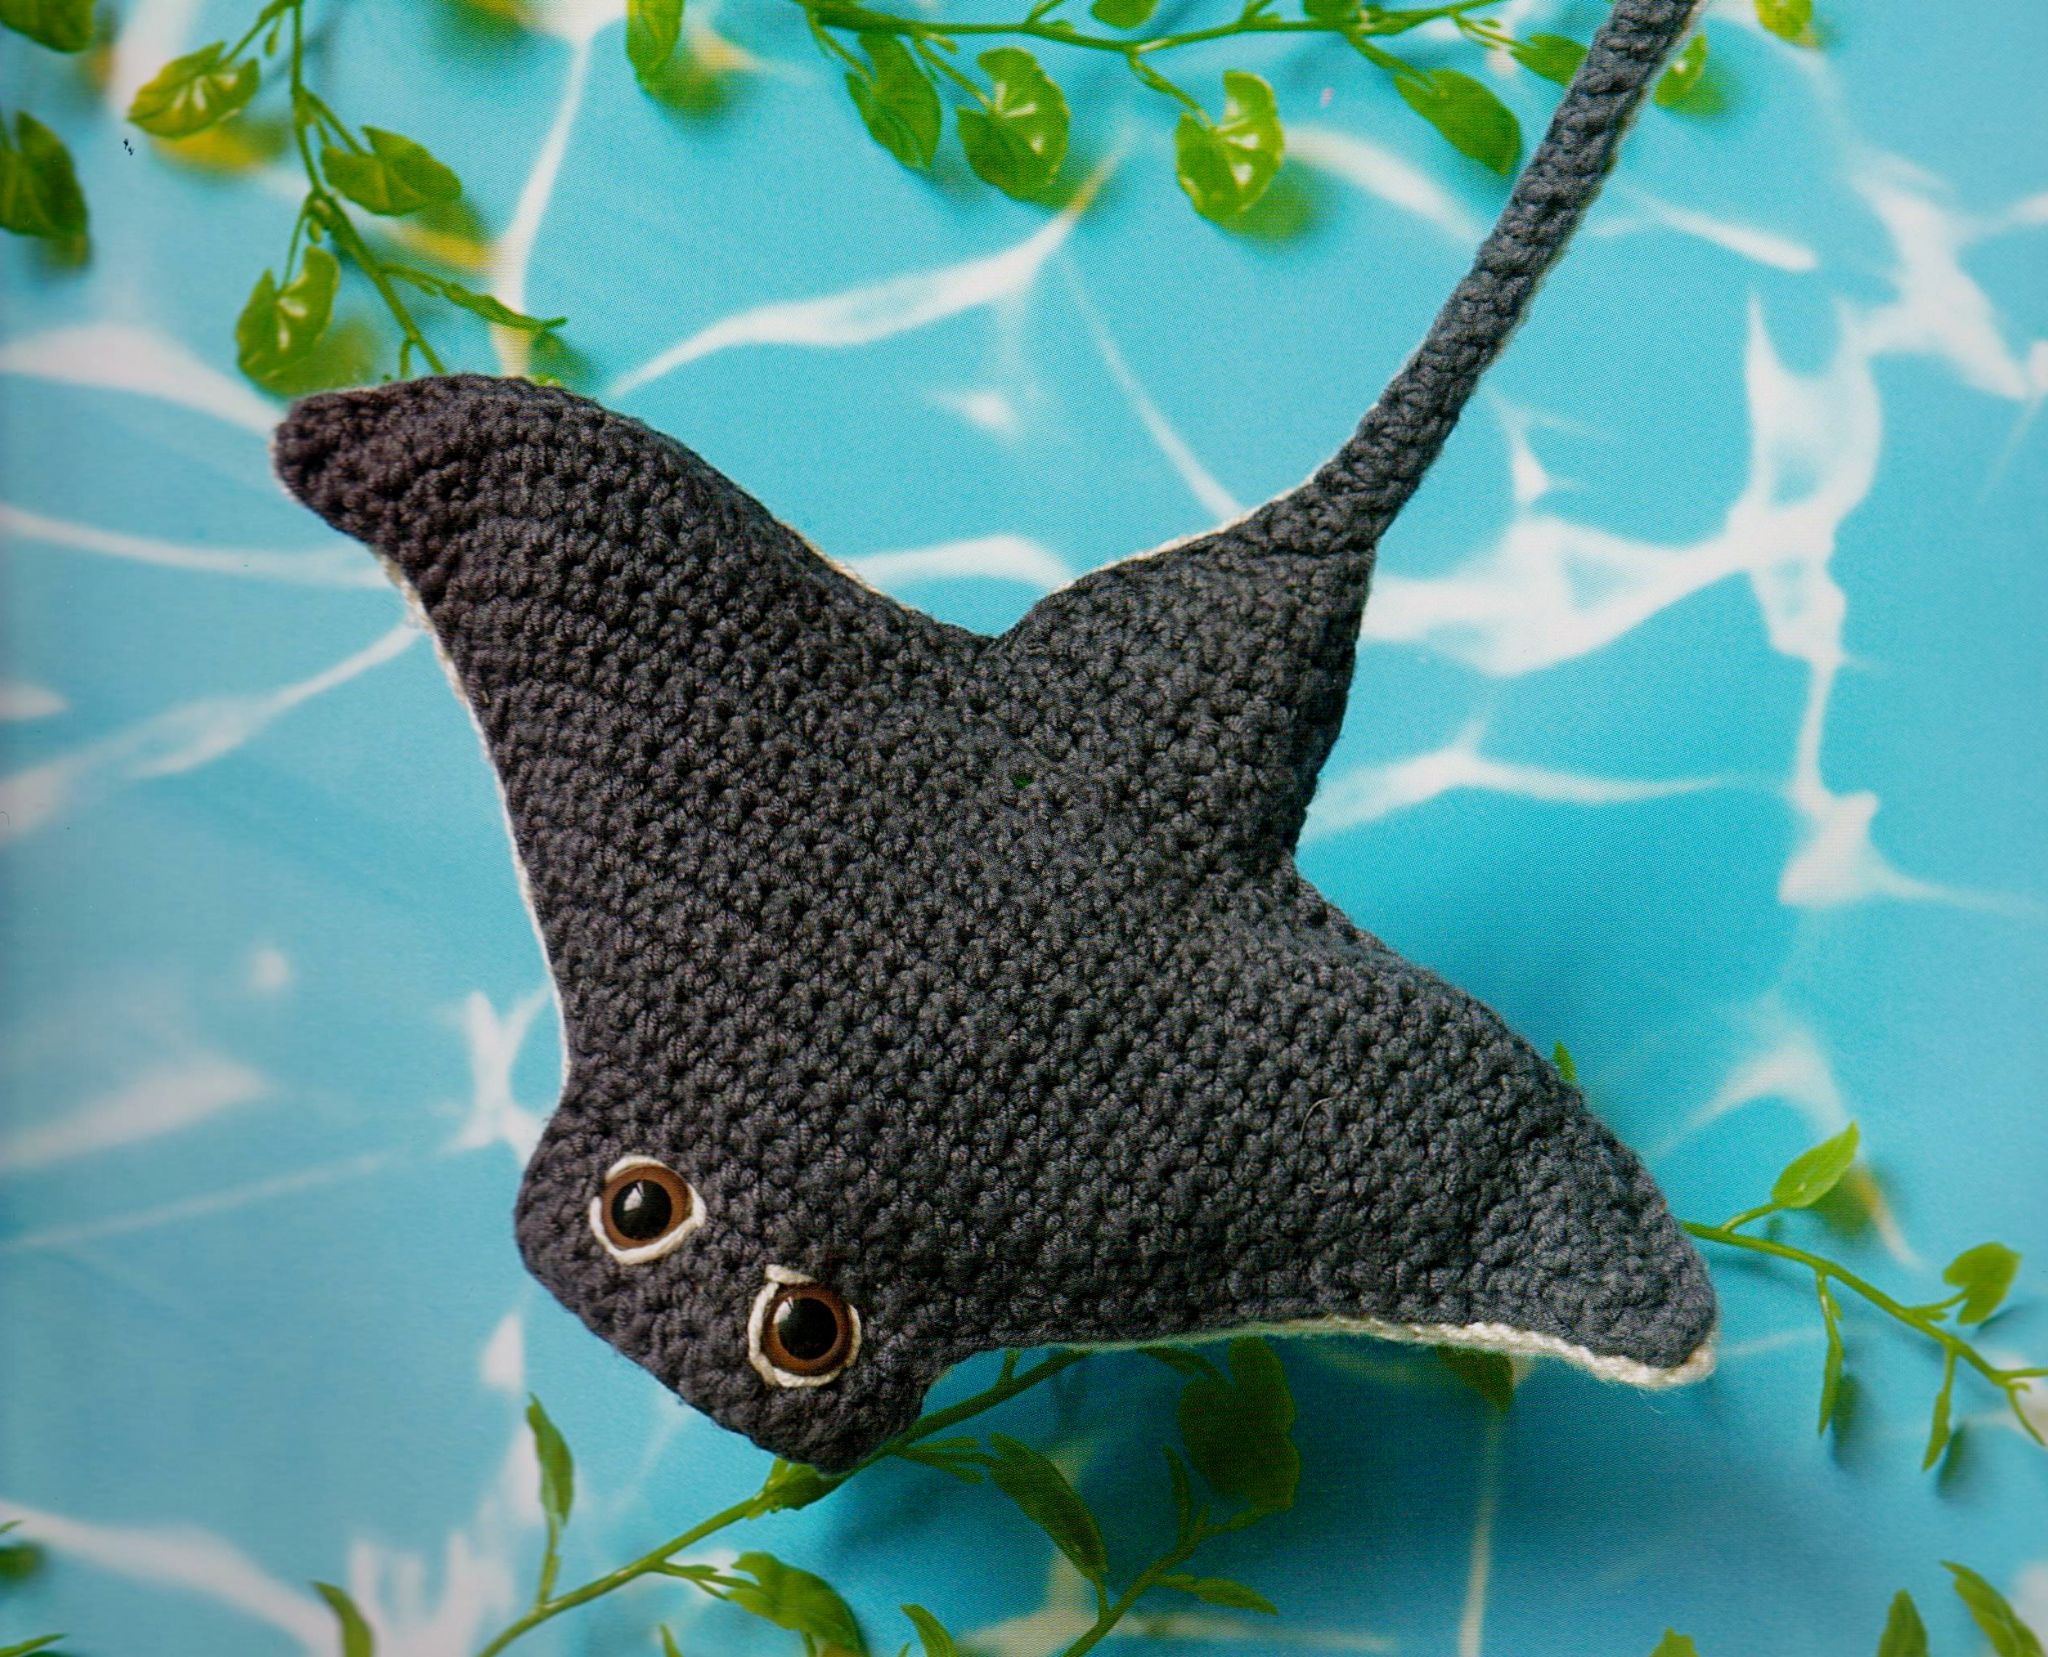 Unusual Knitting Patterns Original Crochet Pattern To Make An Unusual Manta Ray A Stuffed Soft Body Toy Approx 8 Wide In Double Knitting